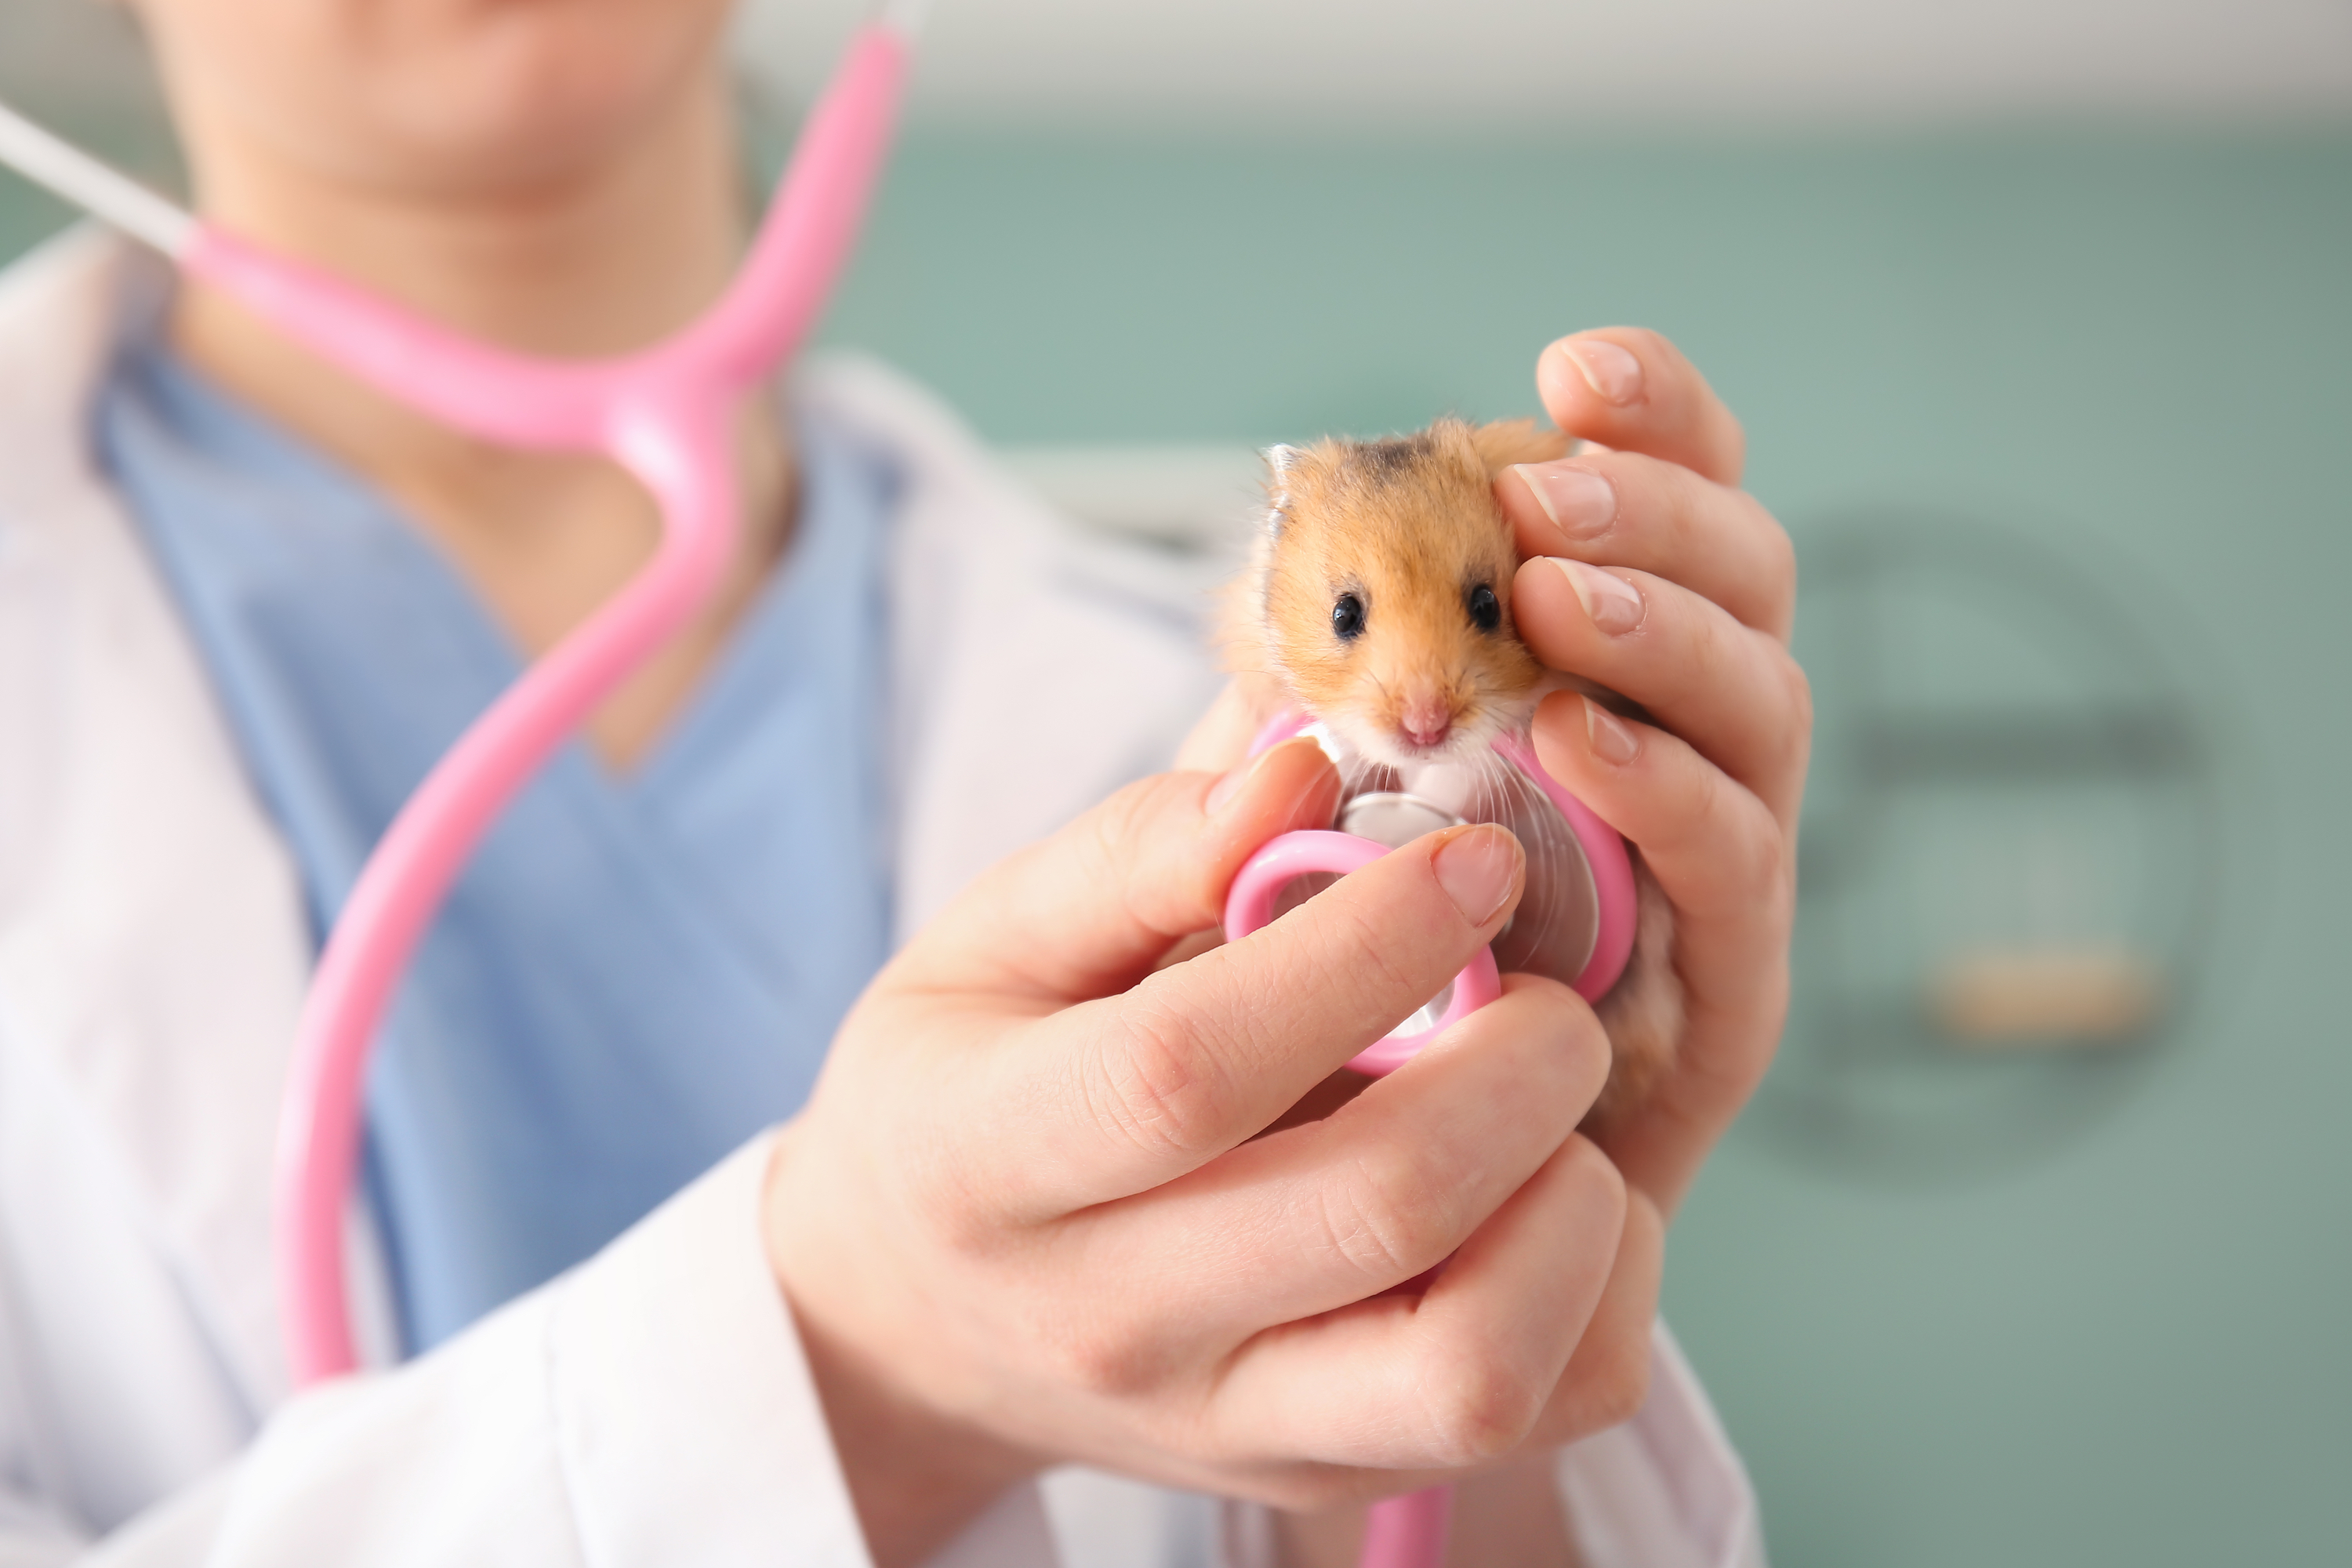 Why Do Hamsters Die So Easily? 15 Causes of Sudden Death